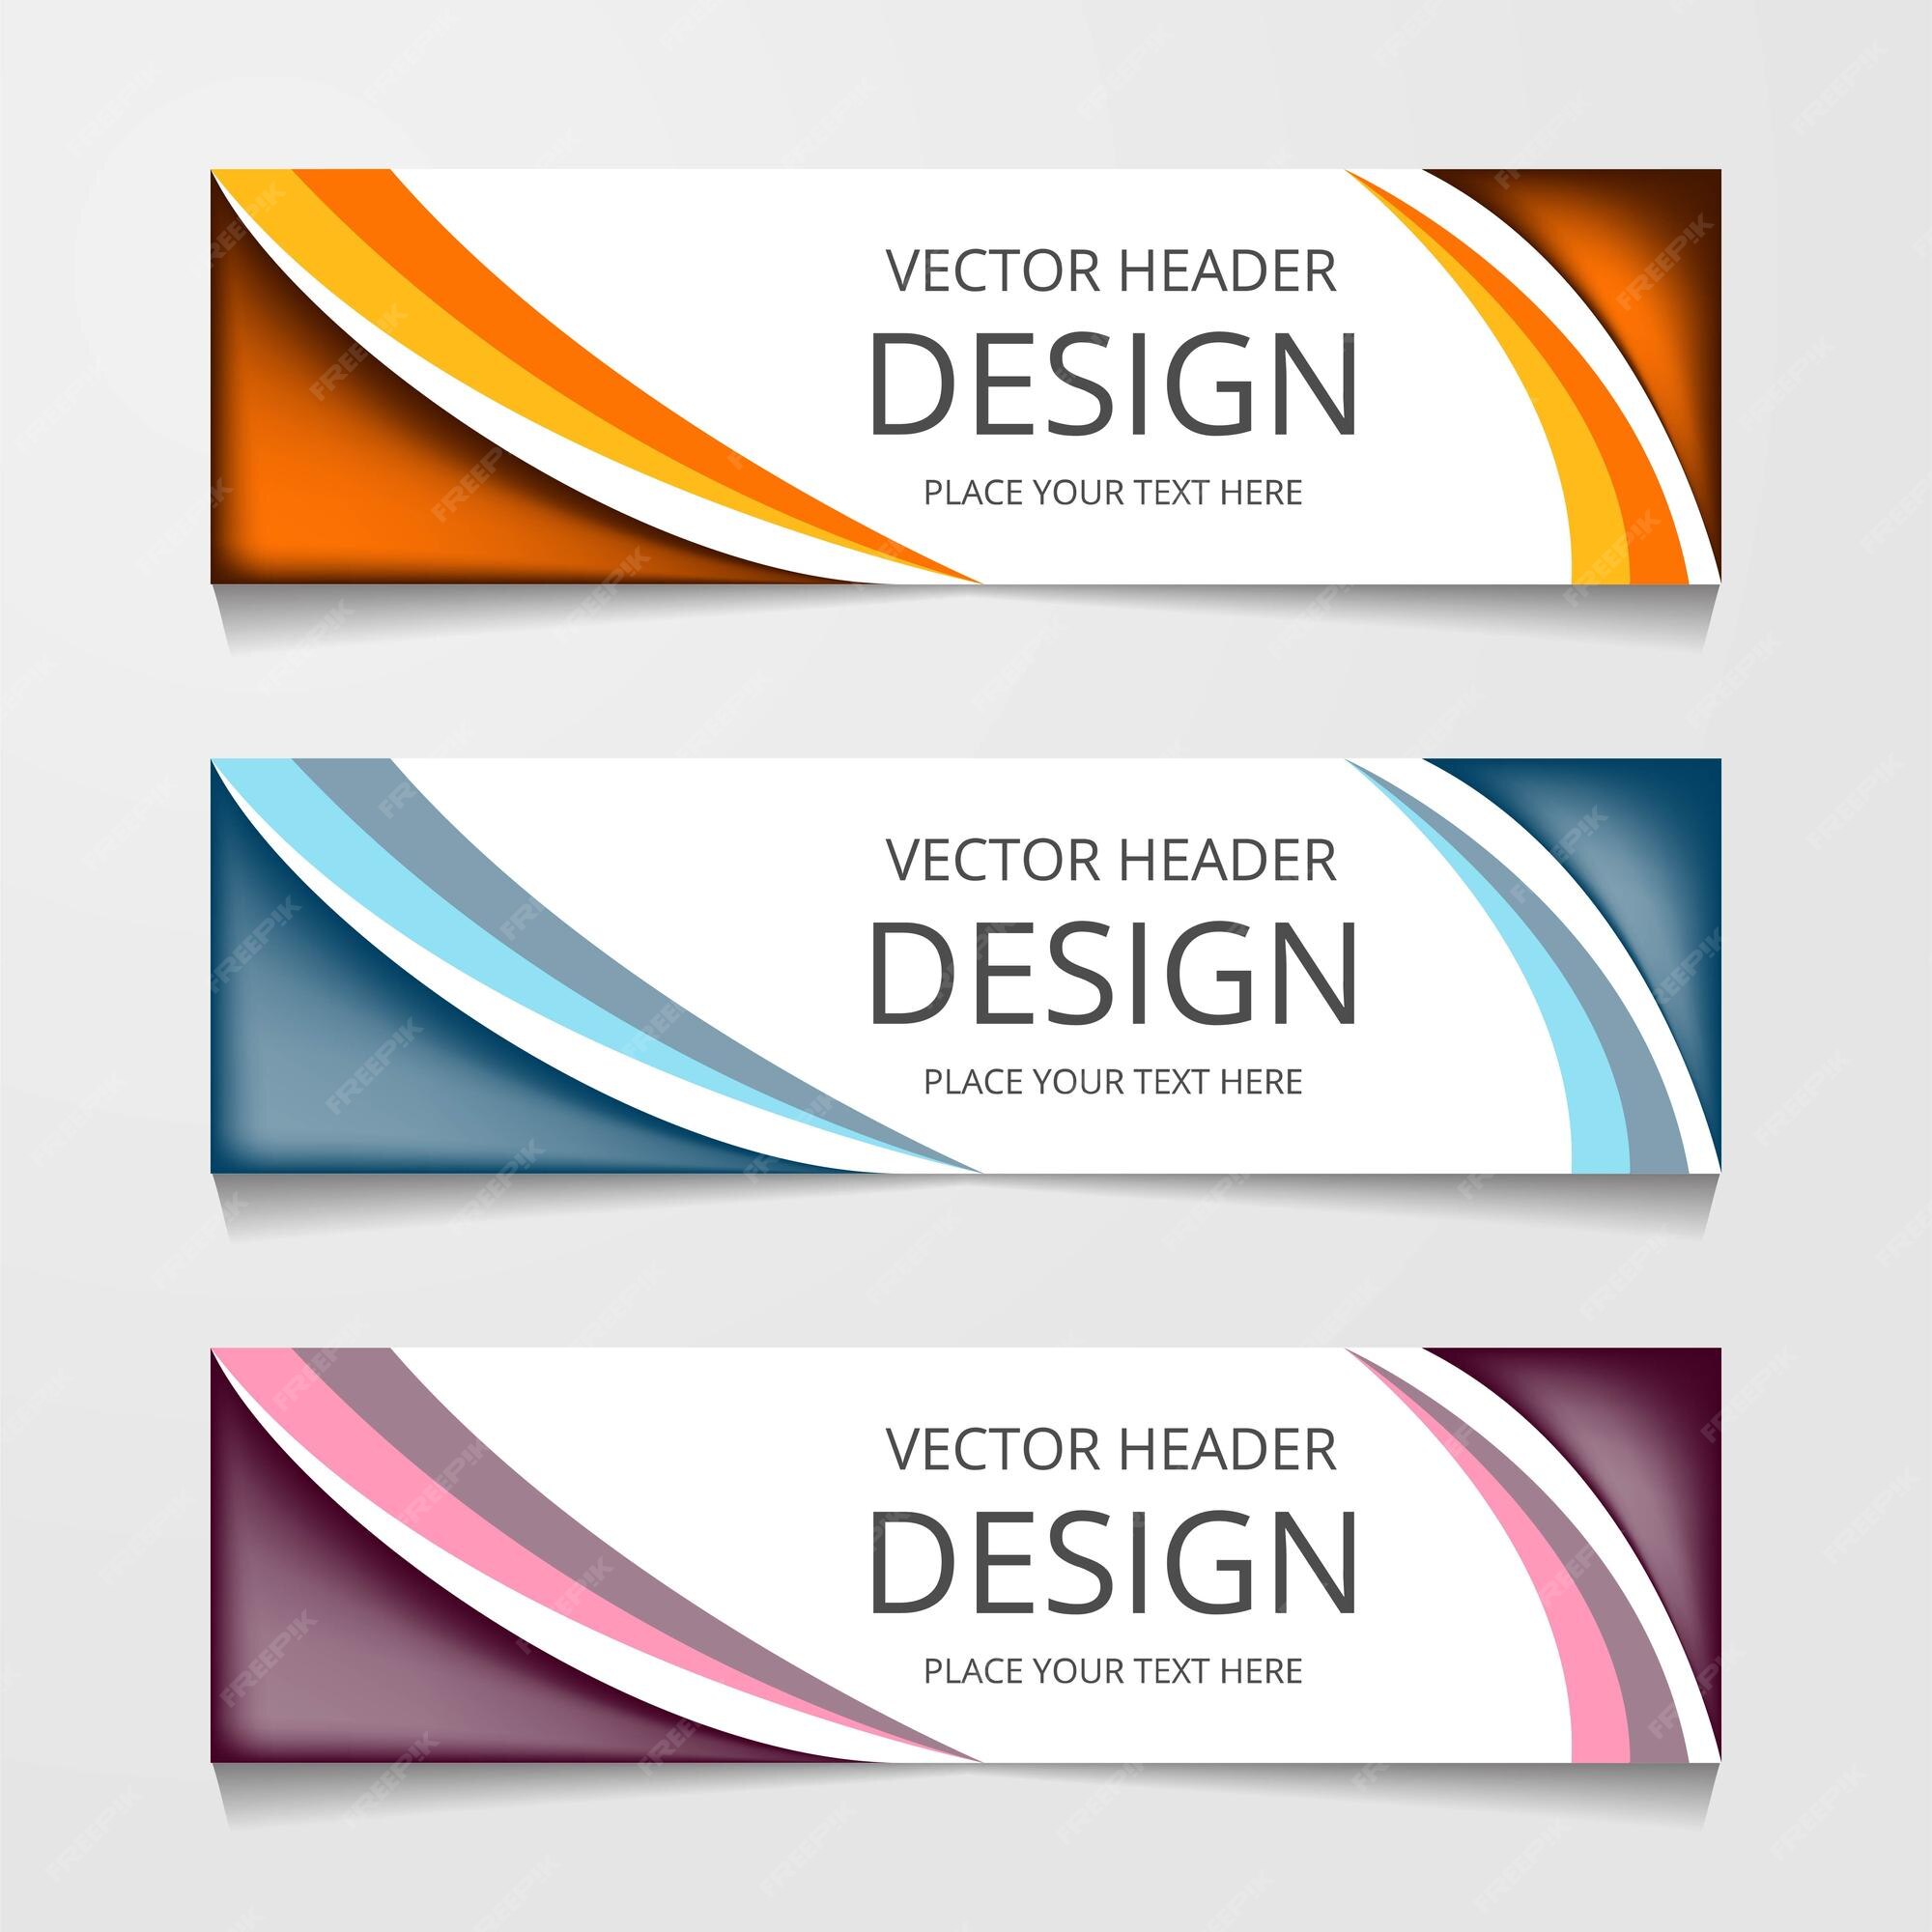 Free Vector | Abstract web banner design background or header templates